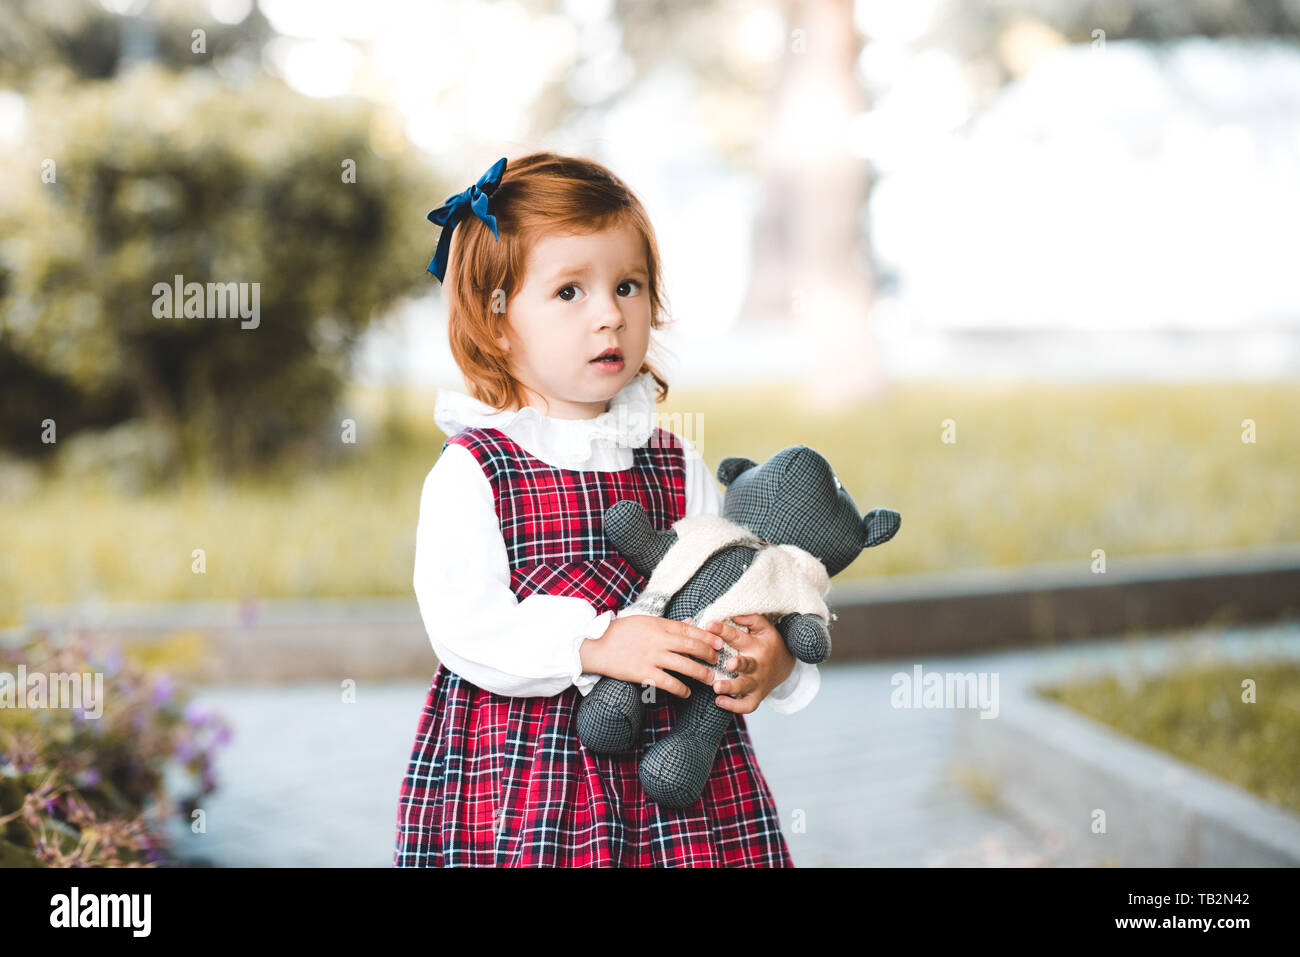 Cute baby girl 1-2 year old holding teddy bear outdoors. Looking at camera. Childhood. Stock Photo